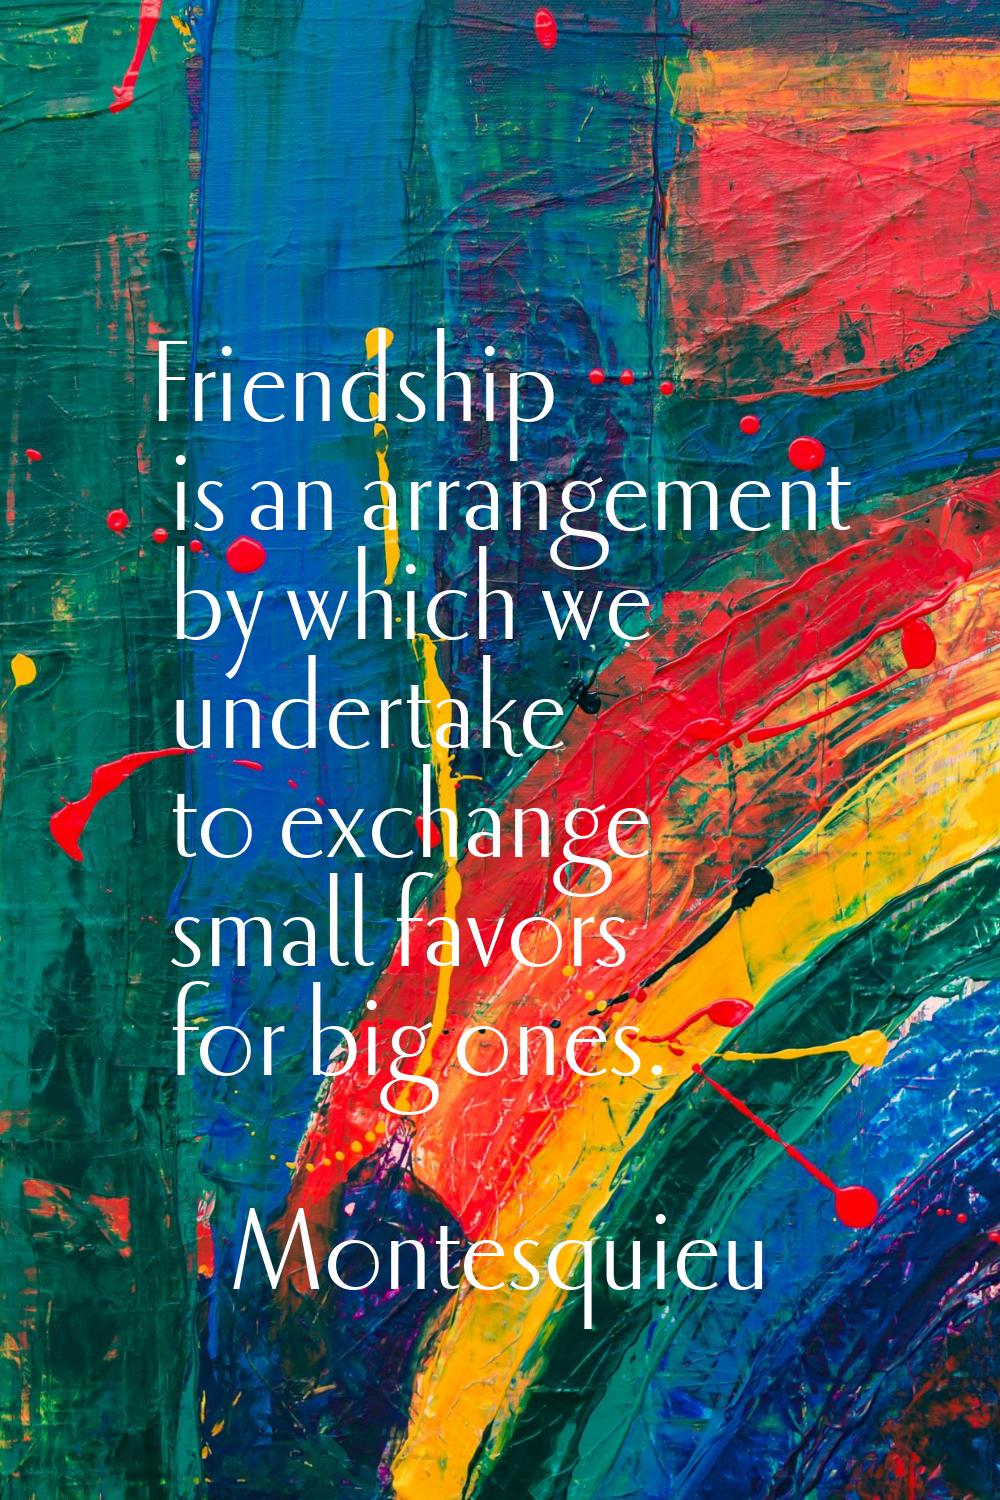 Friendship is an arrangement by which we undertake to exchange small favors for big ones.